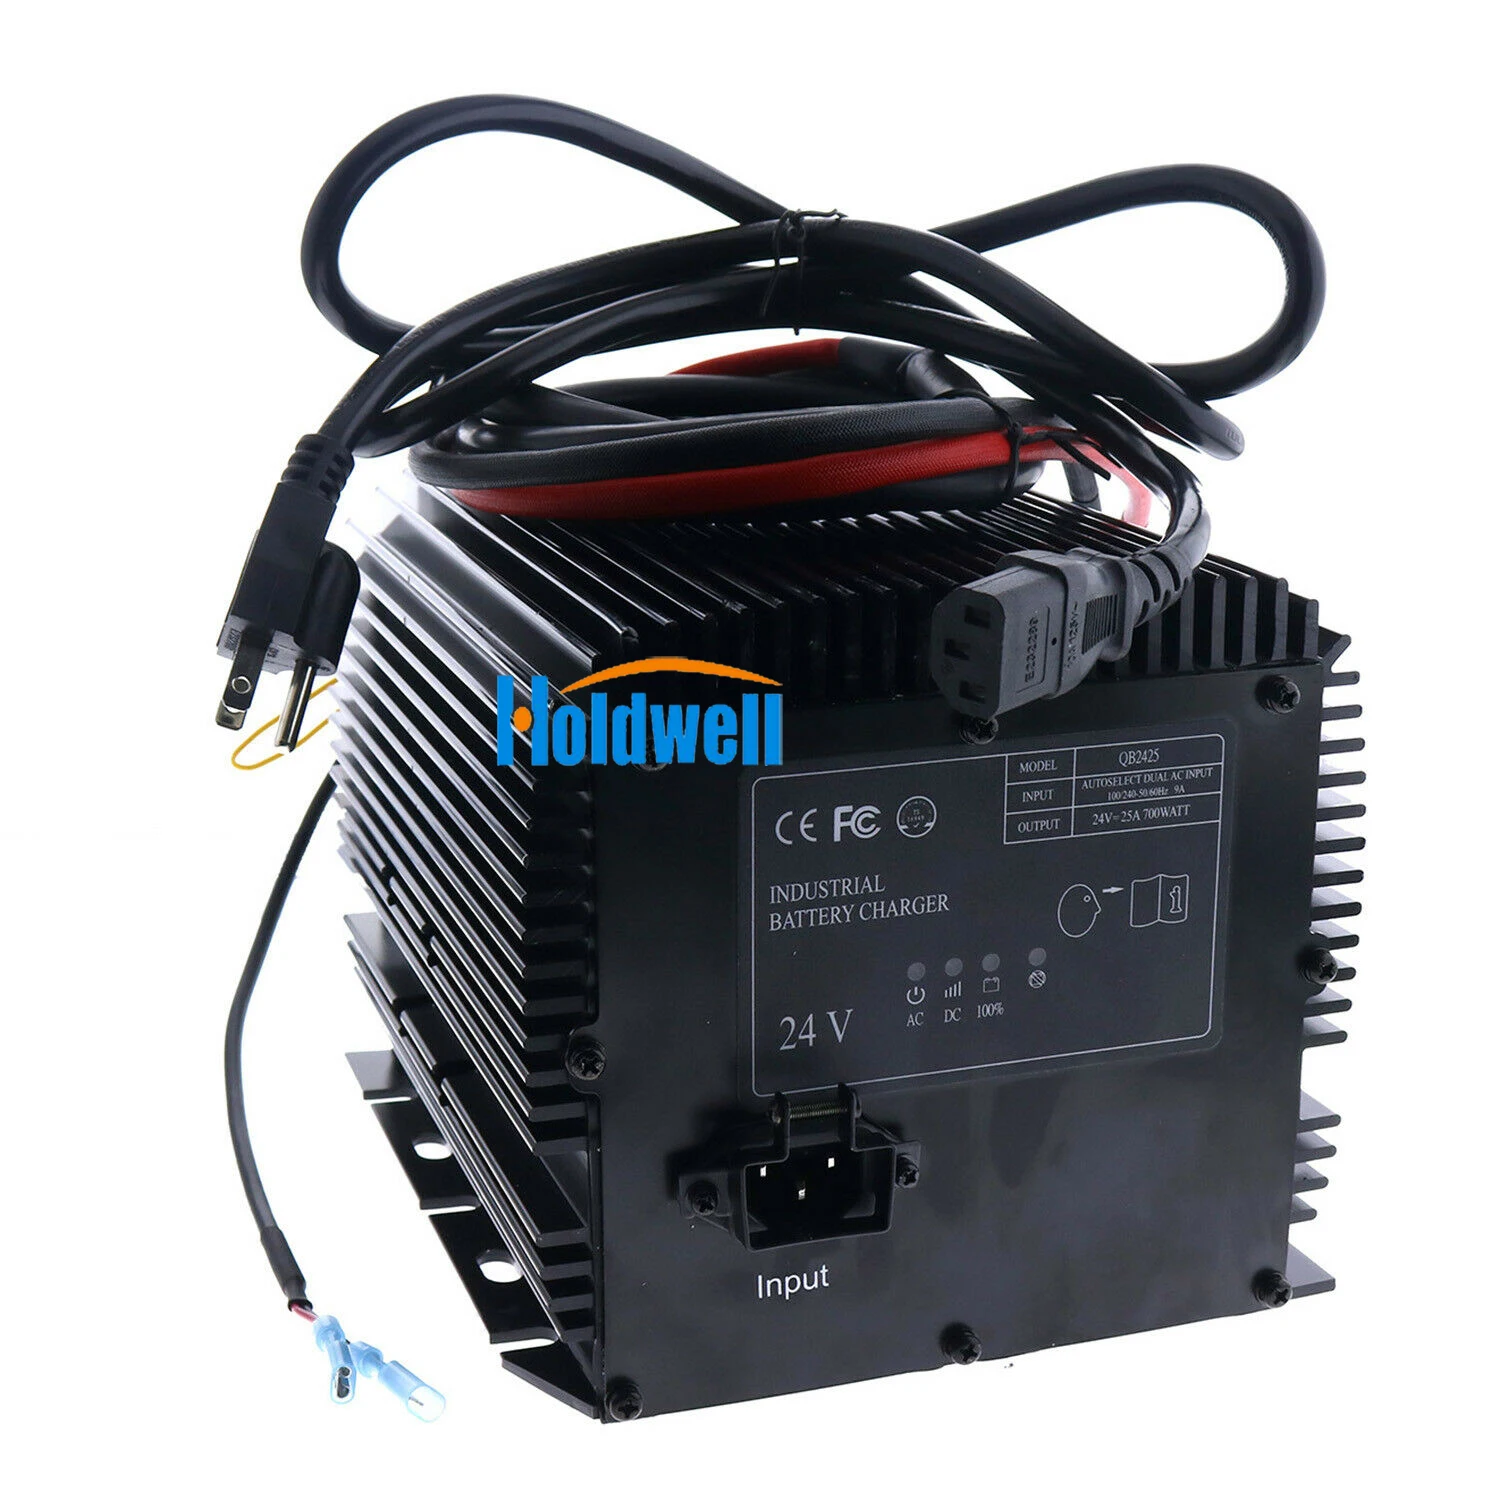 

Holdwell Battery Charger 24V 25A Signet HB600 HB600-24b Compatible for Genie Skyjack JLG Scissor Lift